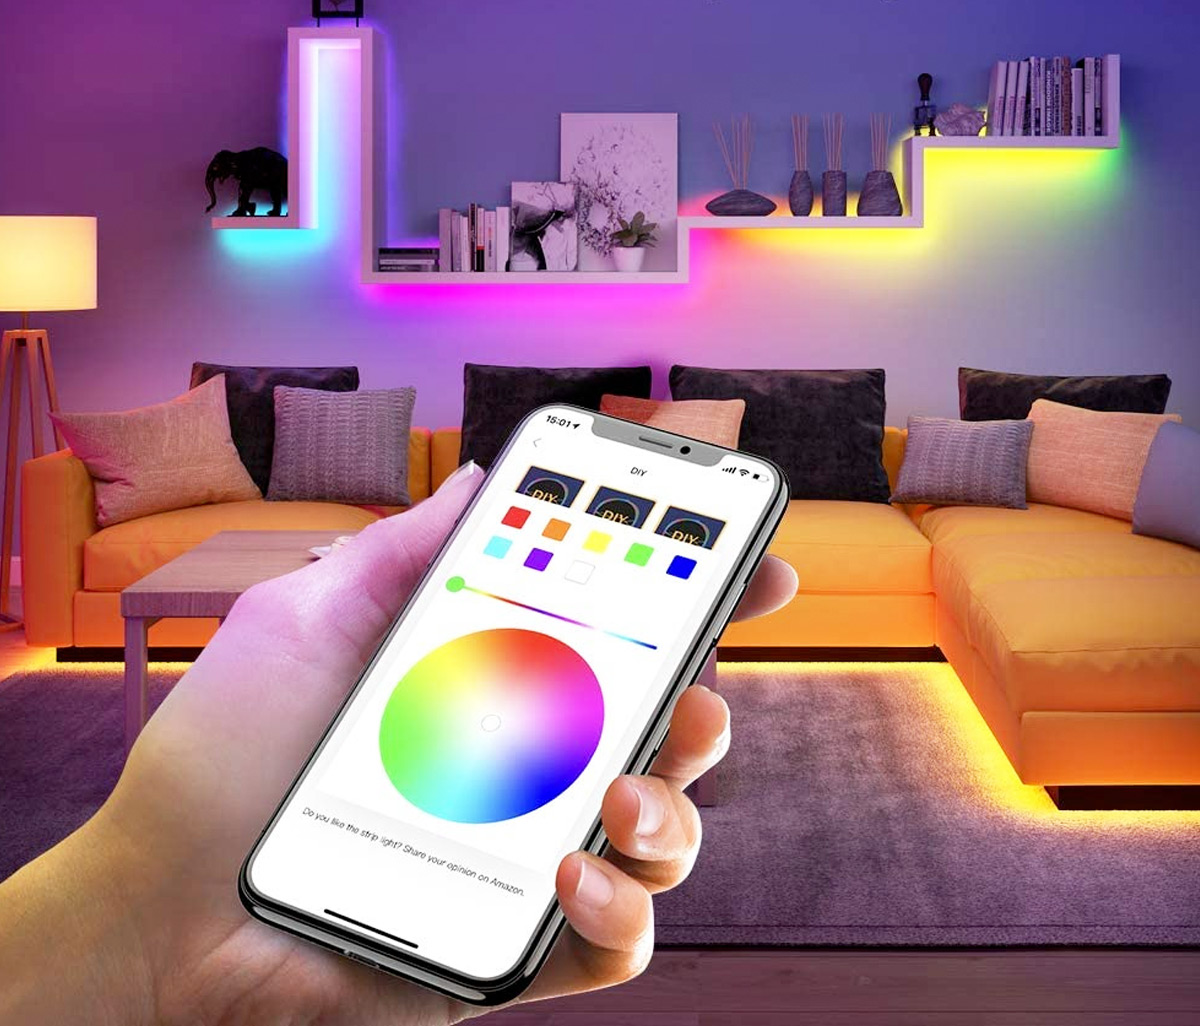 person holding smart phone with color changing app to control the rainbow led lights within the room behind them